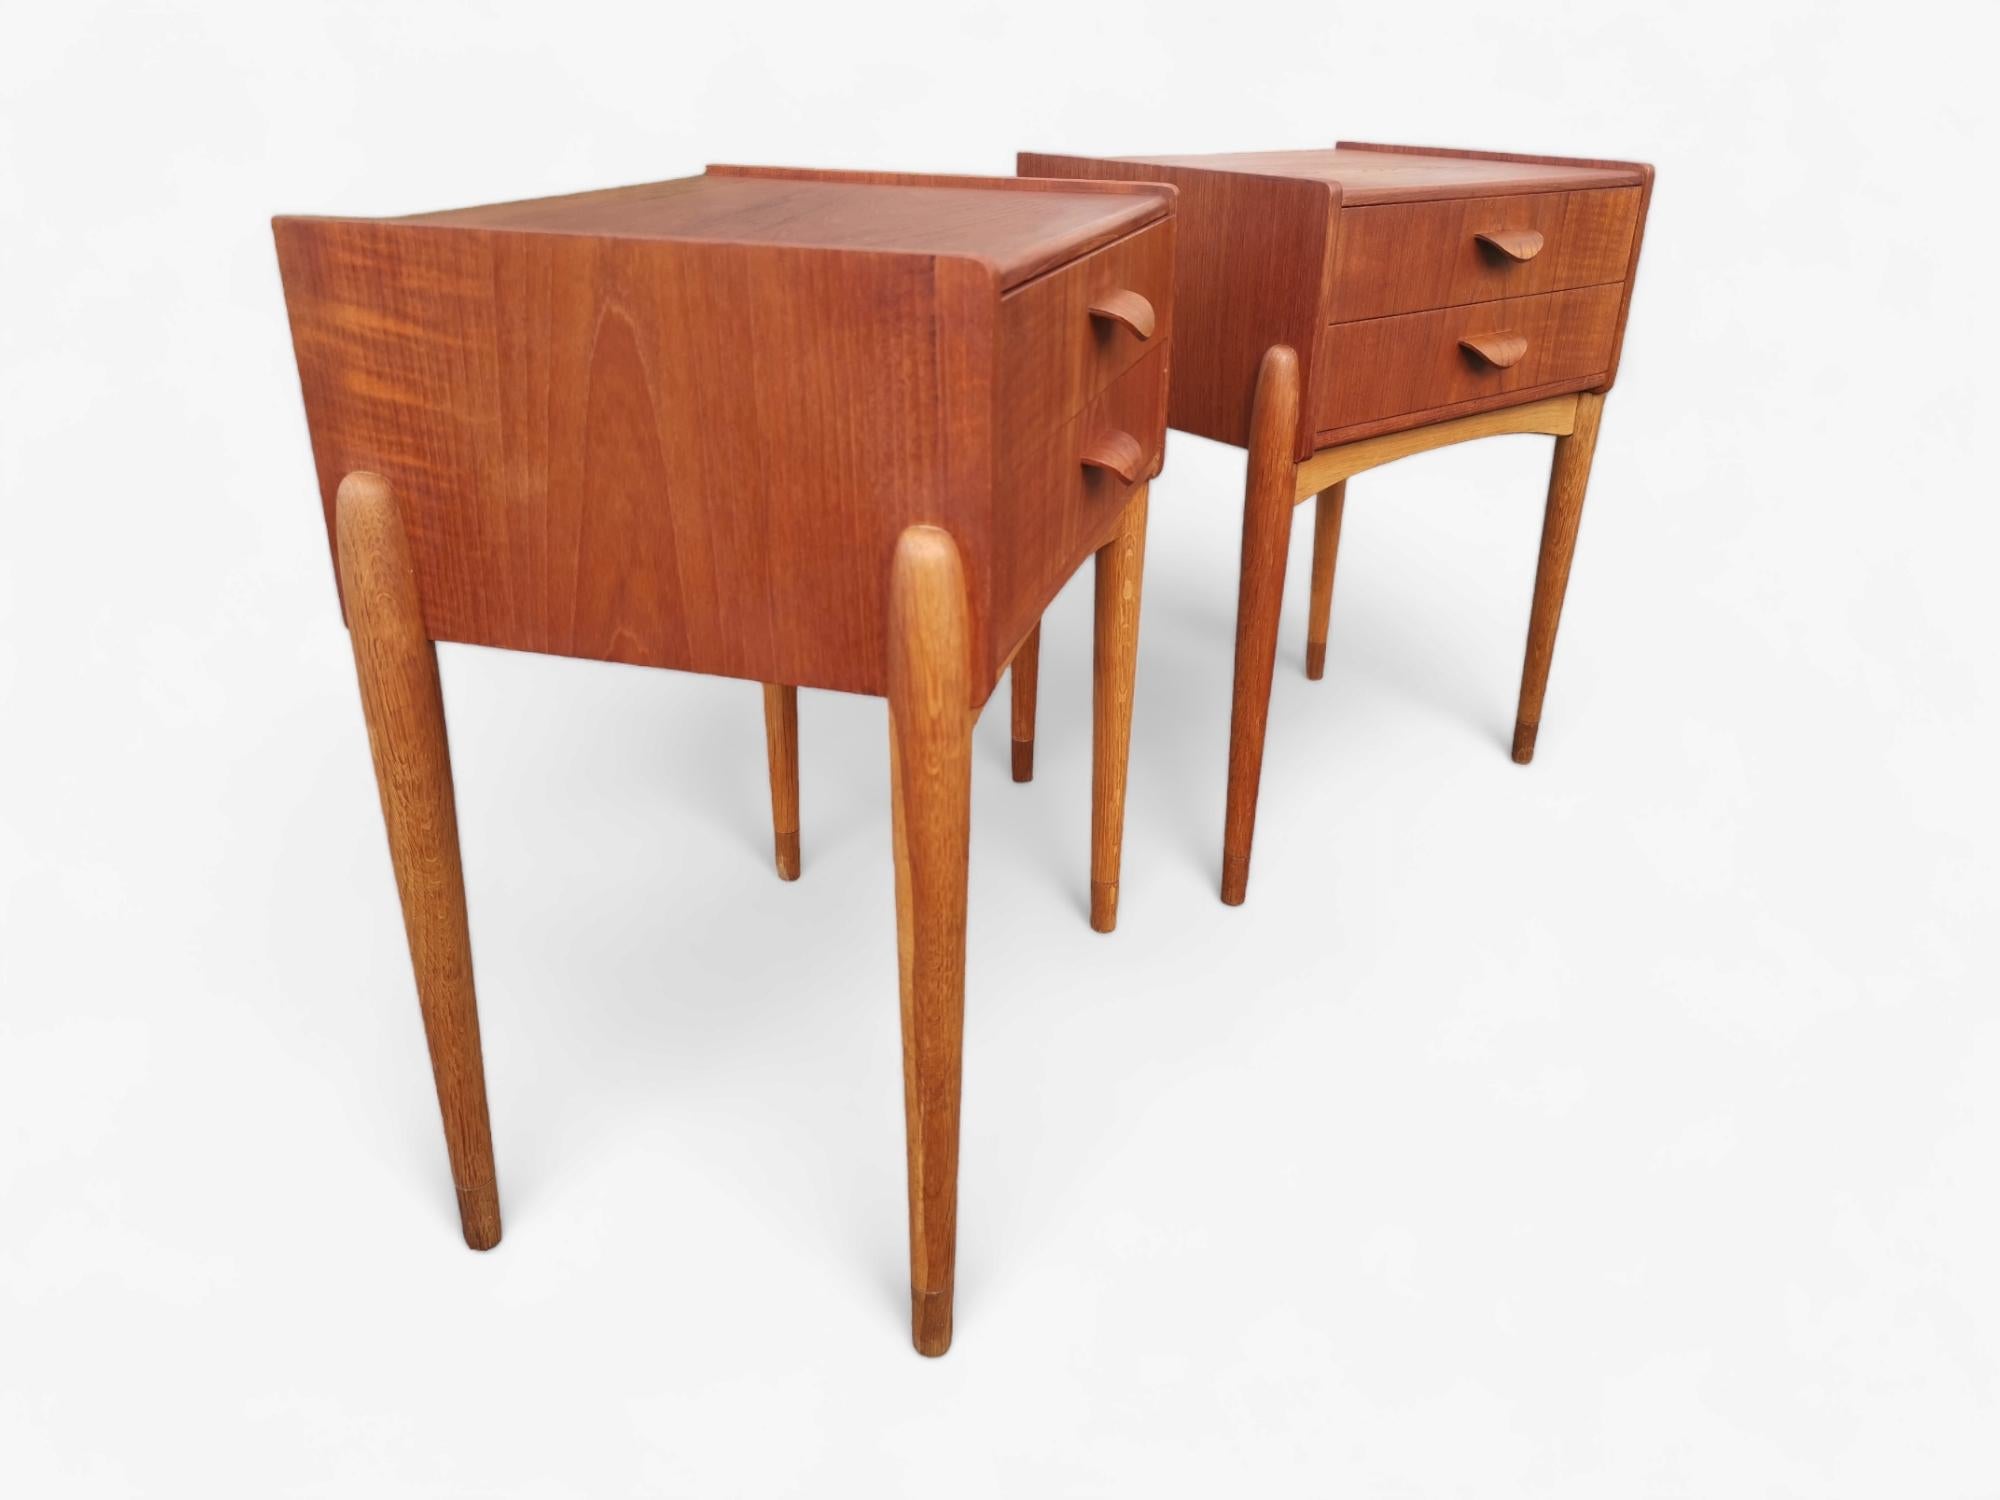 Classic Danish Nightstands From the 60s, With two drawers in each nightstand,  so you can store away, and keep your space organized and clutter-free.
These Danish bedside tables is characterized by clean lines, minimalistic aesthetics, and